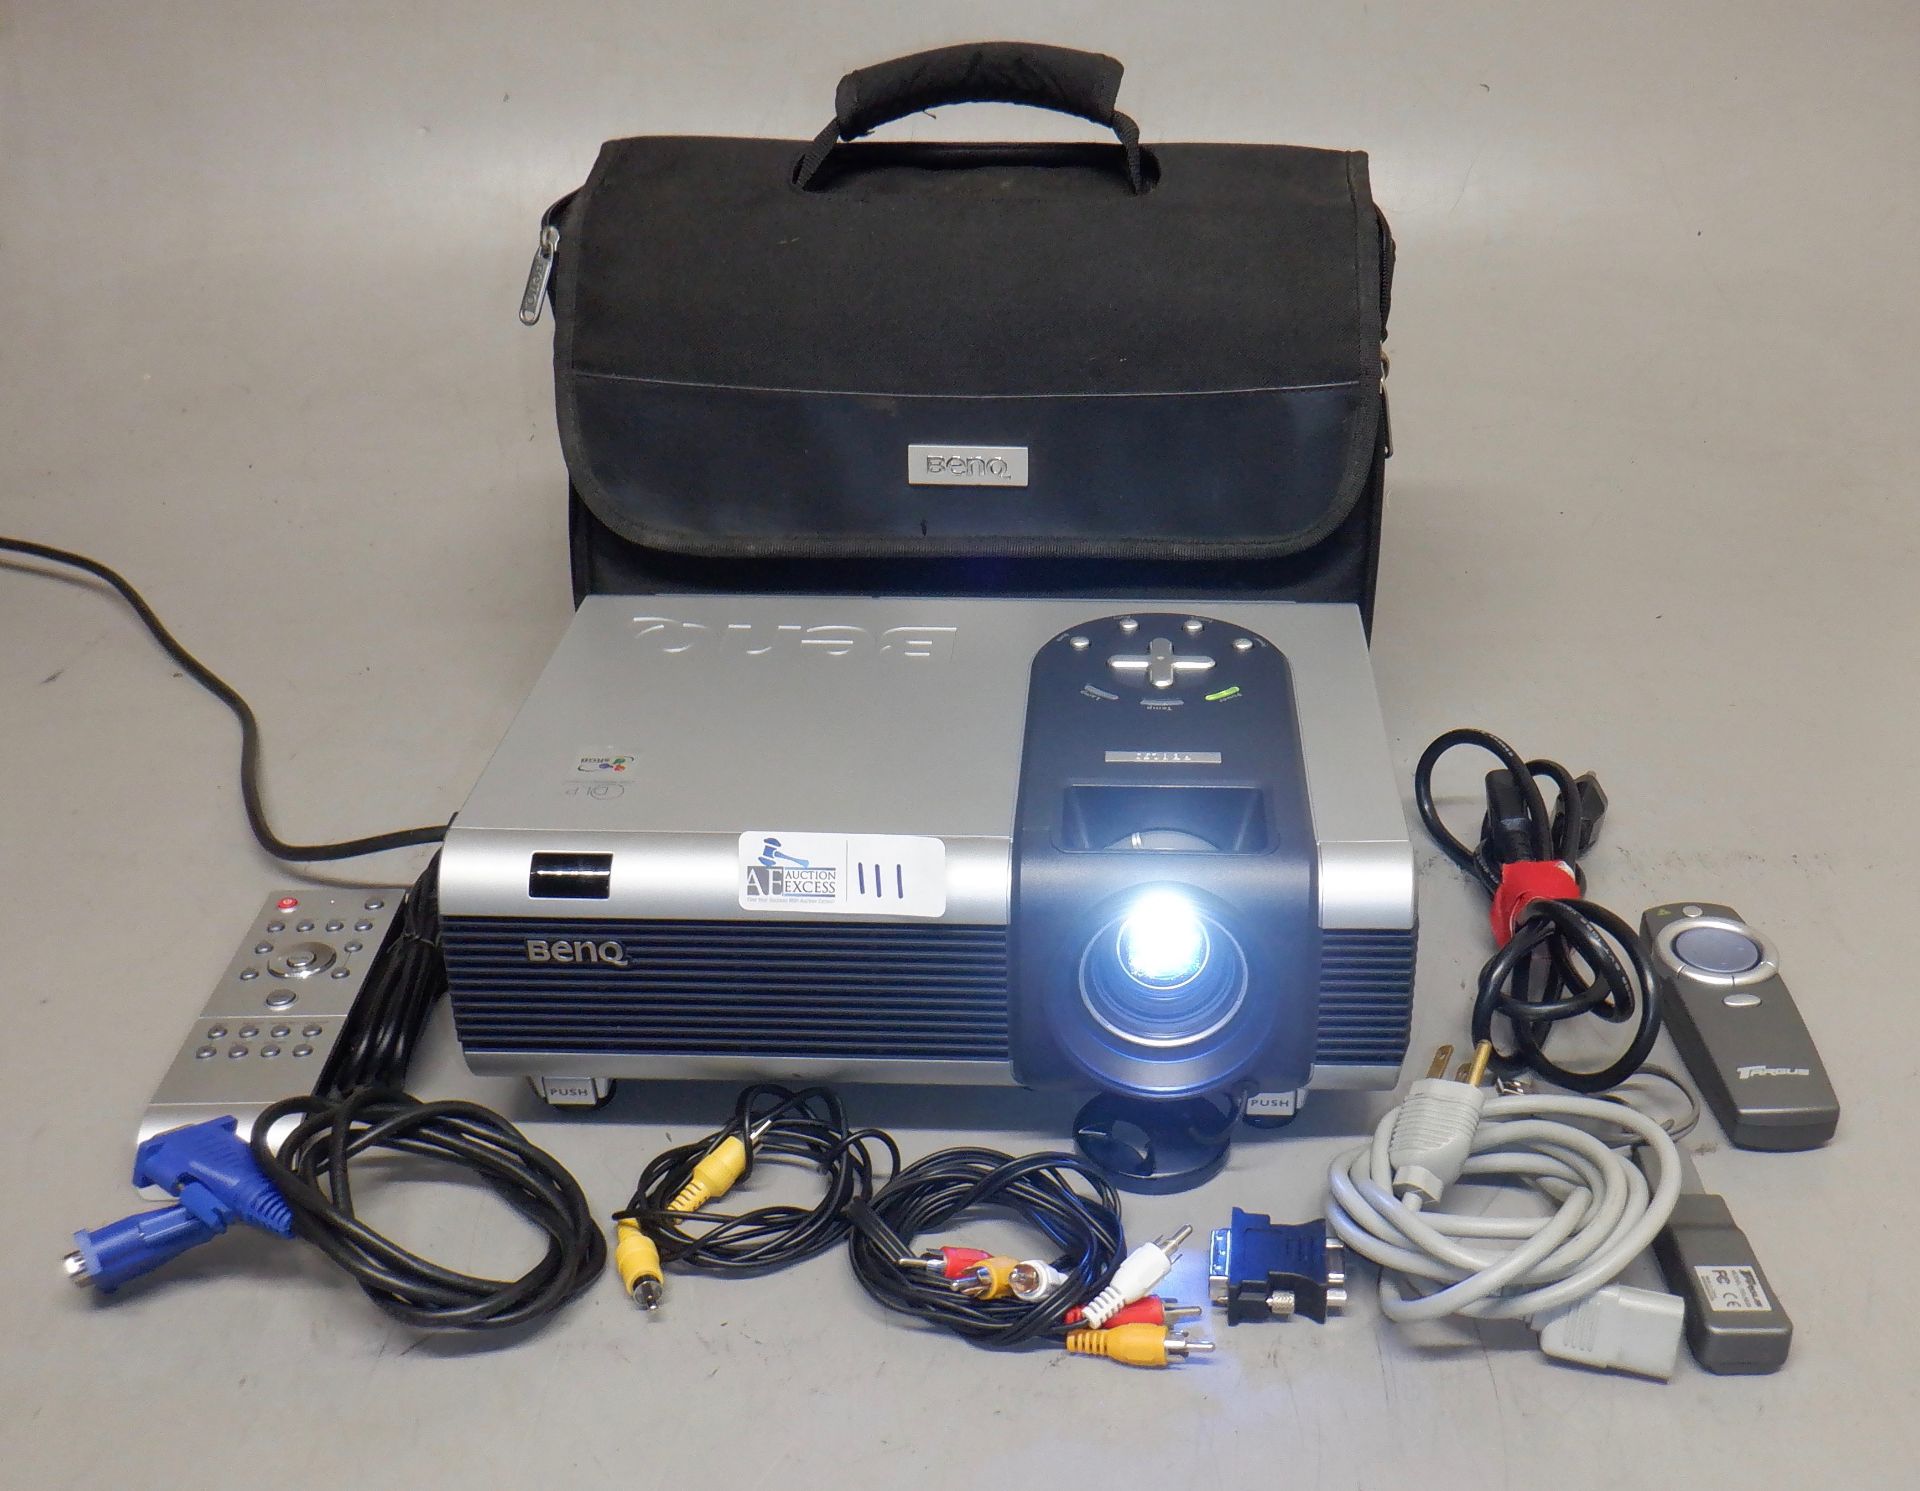 BENO PROJECTOR PB8253 DLP IN CASE - Image 2 of 5